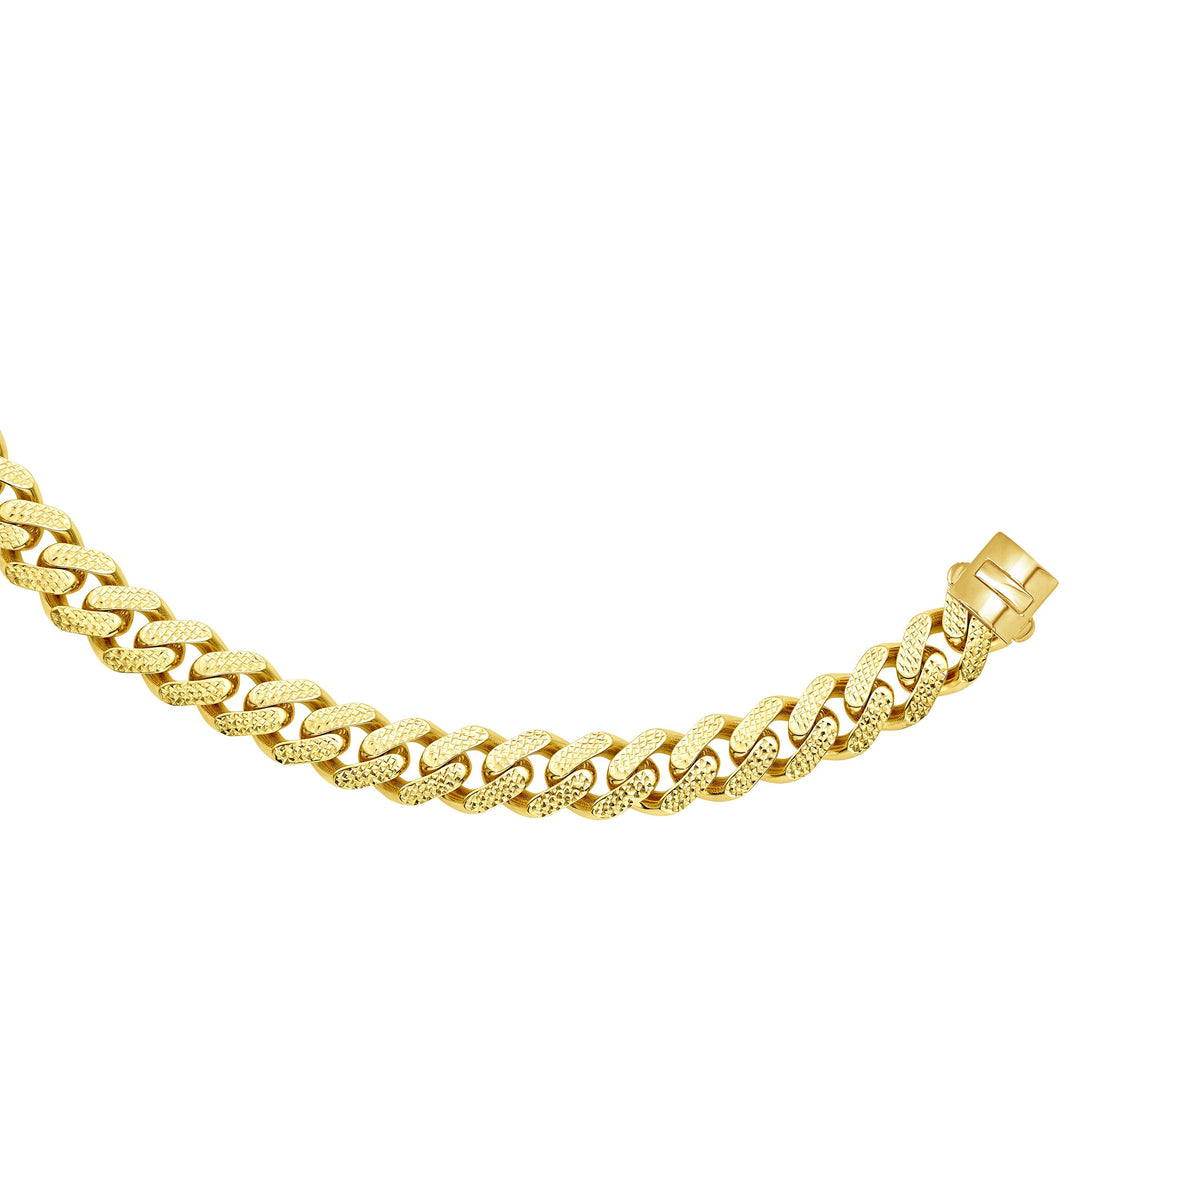 14k Yellow Gold Miami Cuban Link Pave Chain Necklace, Width 13.5mm, 24" fine designer jewelry for men and women